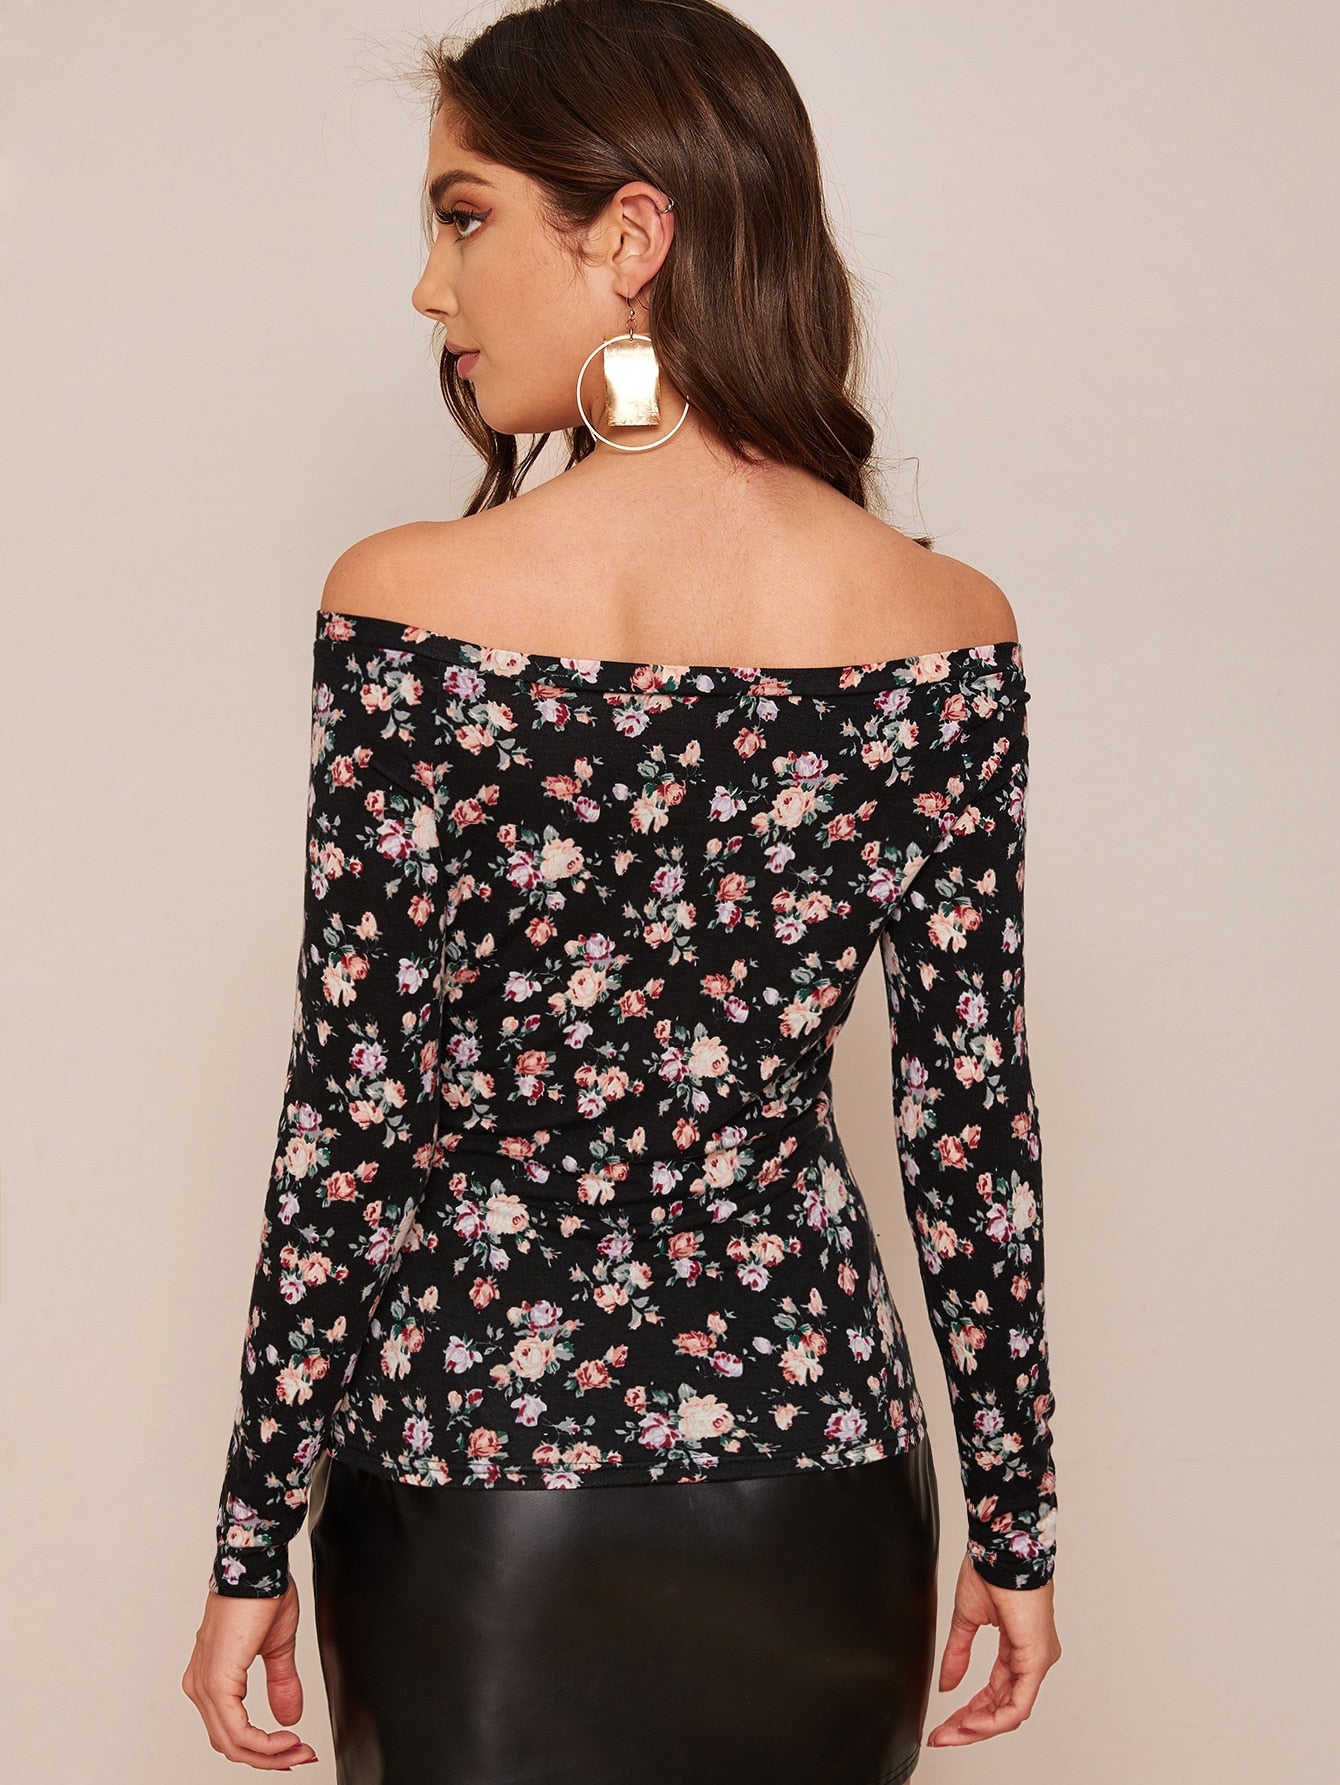 Ditsy Floral Form Fitted Bardot Tee